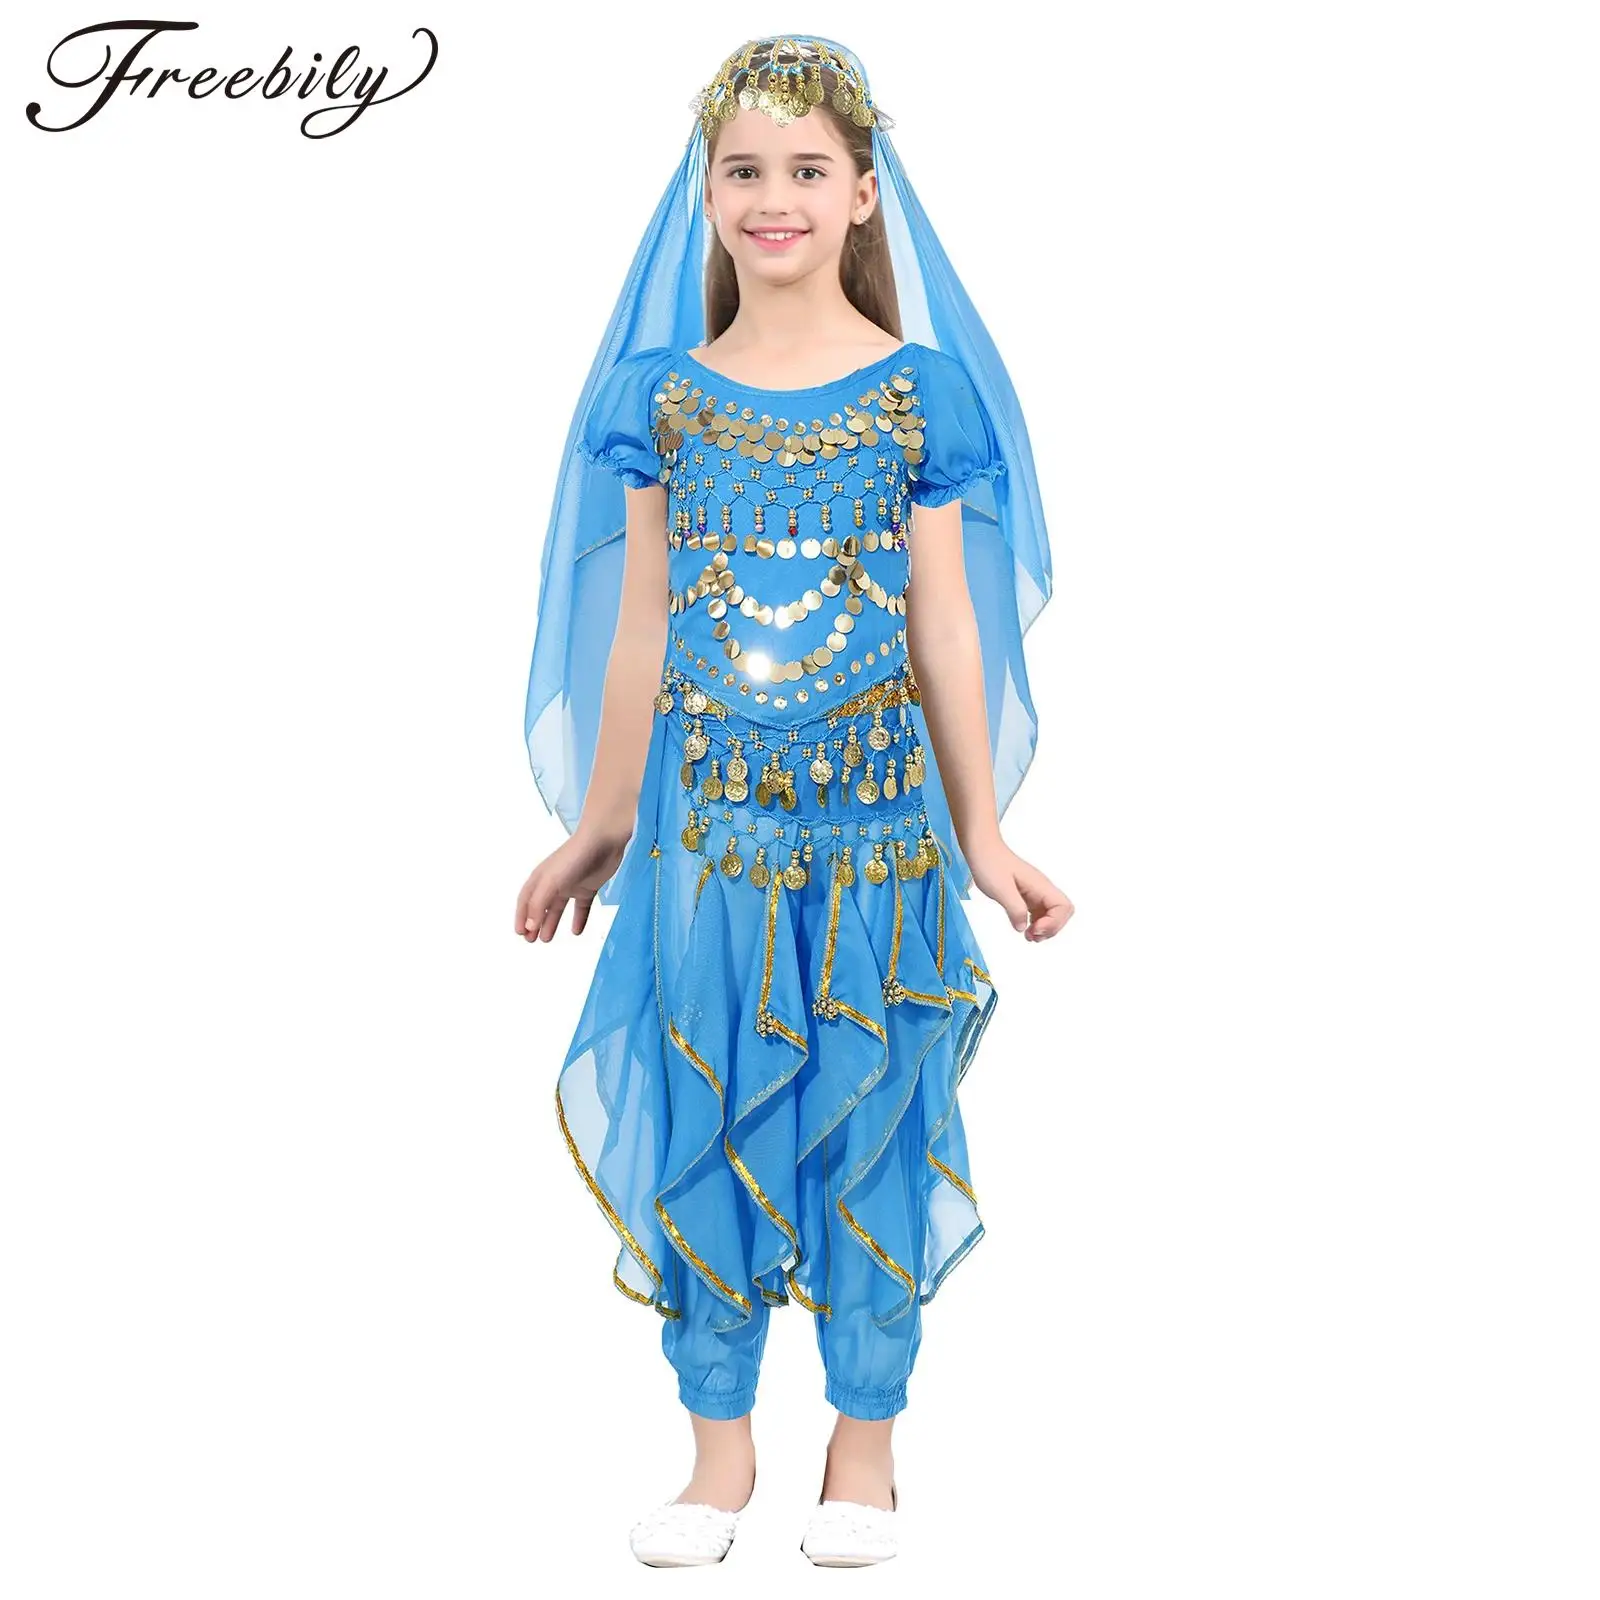 

Kids Girls Indian Belly Dance Costumes Princess Performance Dancewear Child Sequins Chiffon Carnival Party Bellydance Outfit